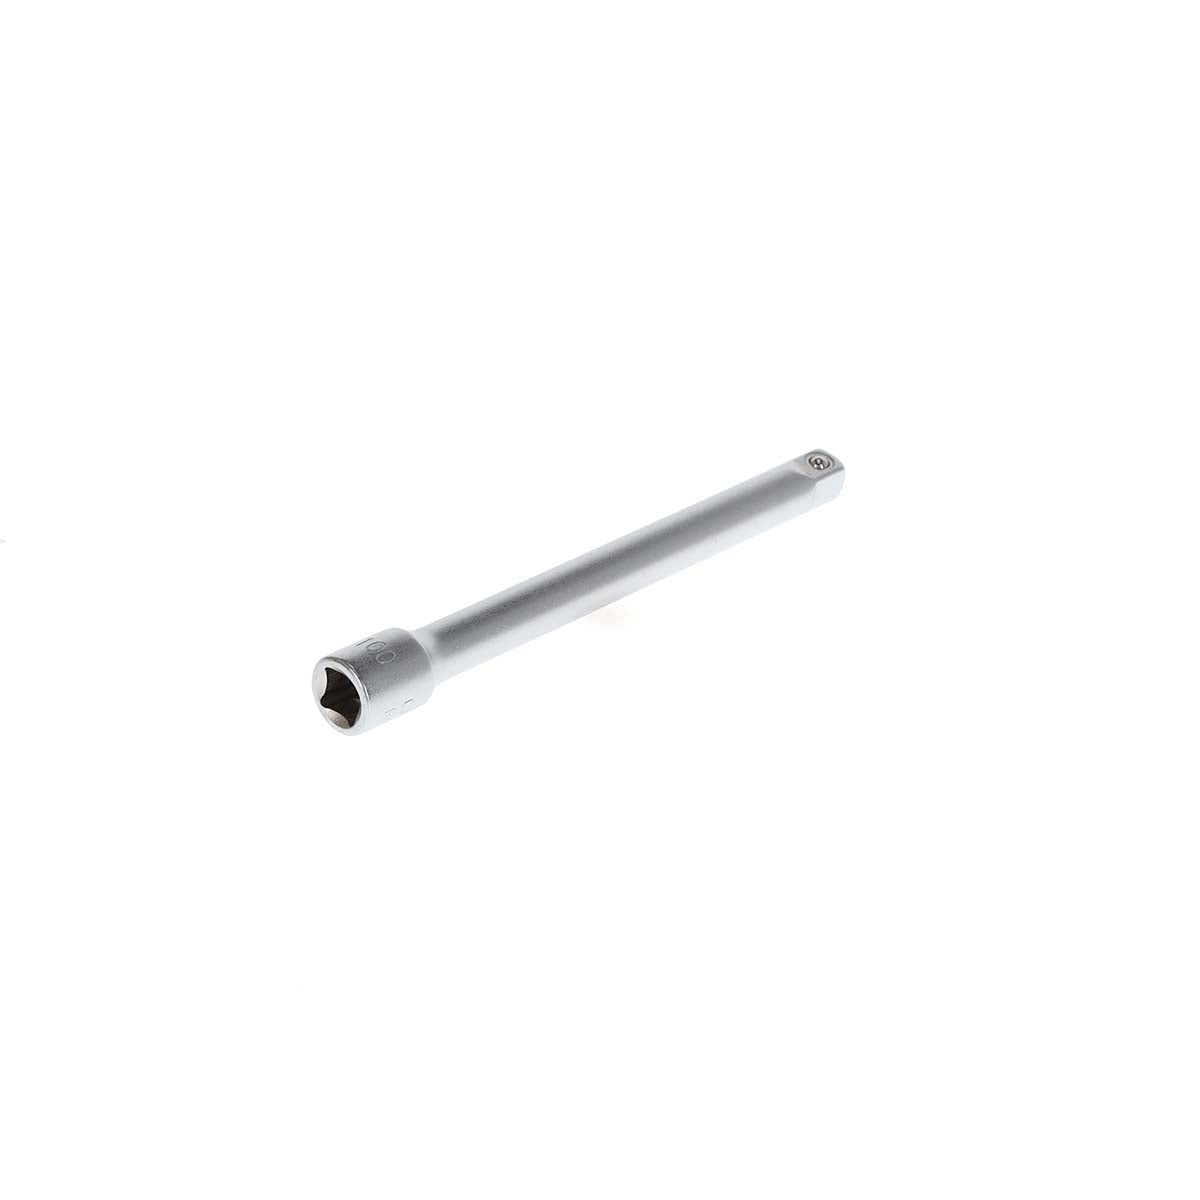 GEDORE red R45100019 - Extension for 1/4" socket wrenches L=100 mm (3300141)